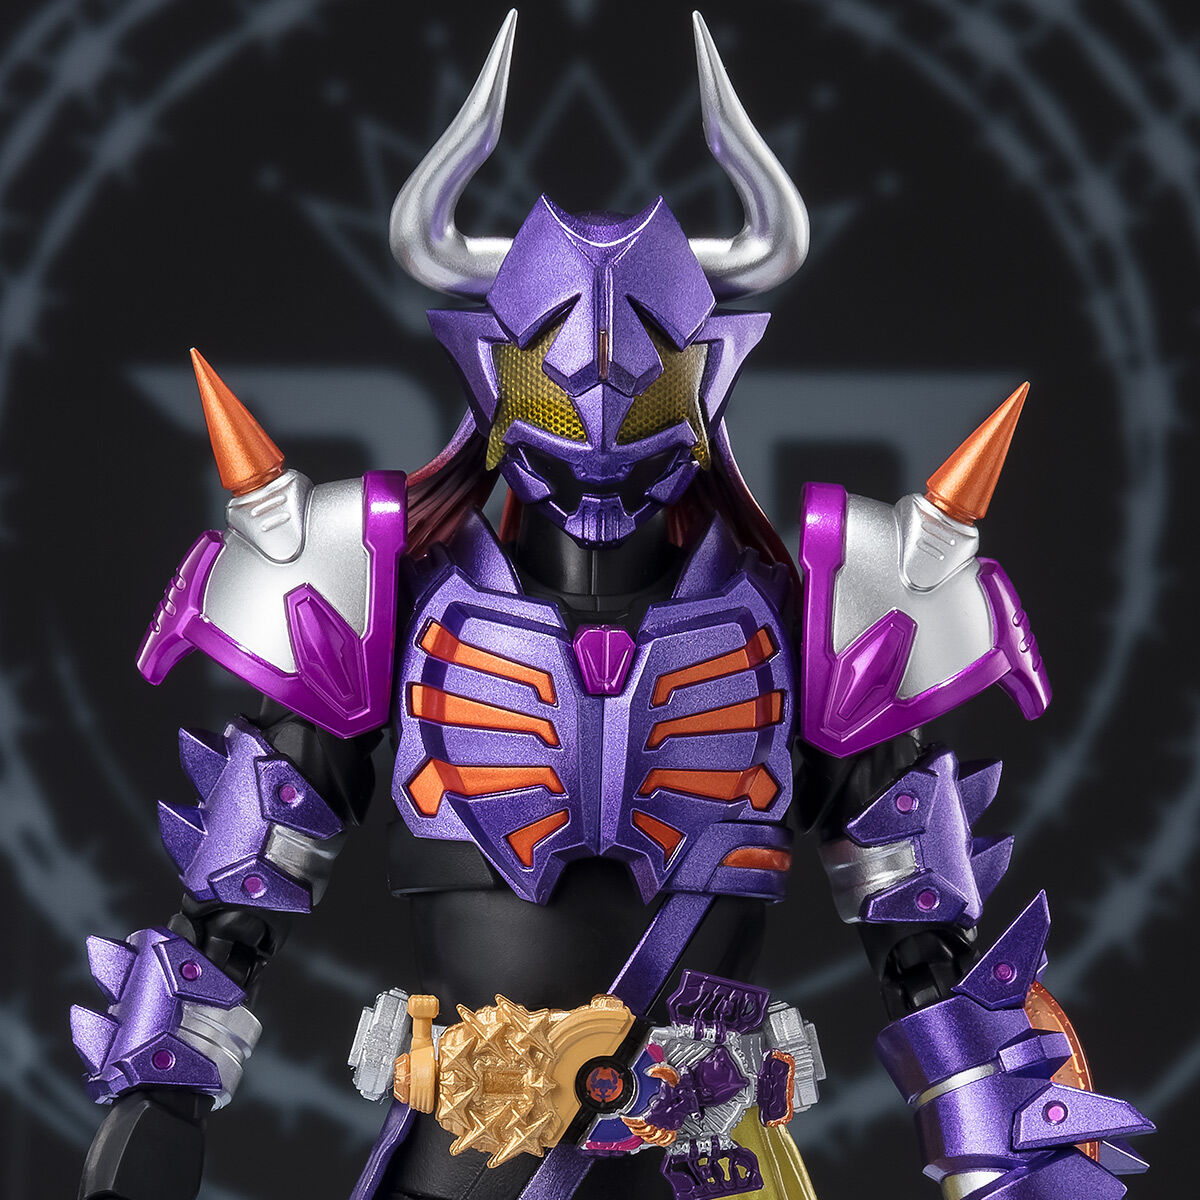 S.H.Figuarts 仮面ライダーバッファ ゾンビフォーム輸送箱伝票跡なし